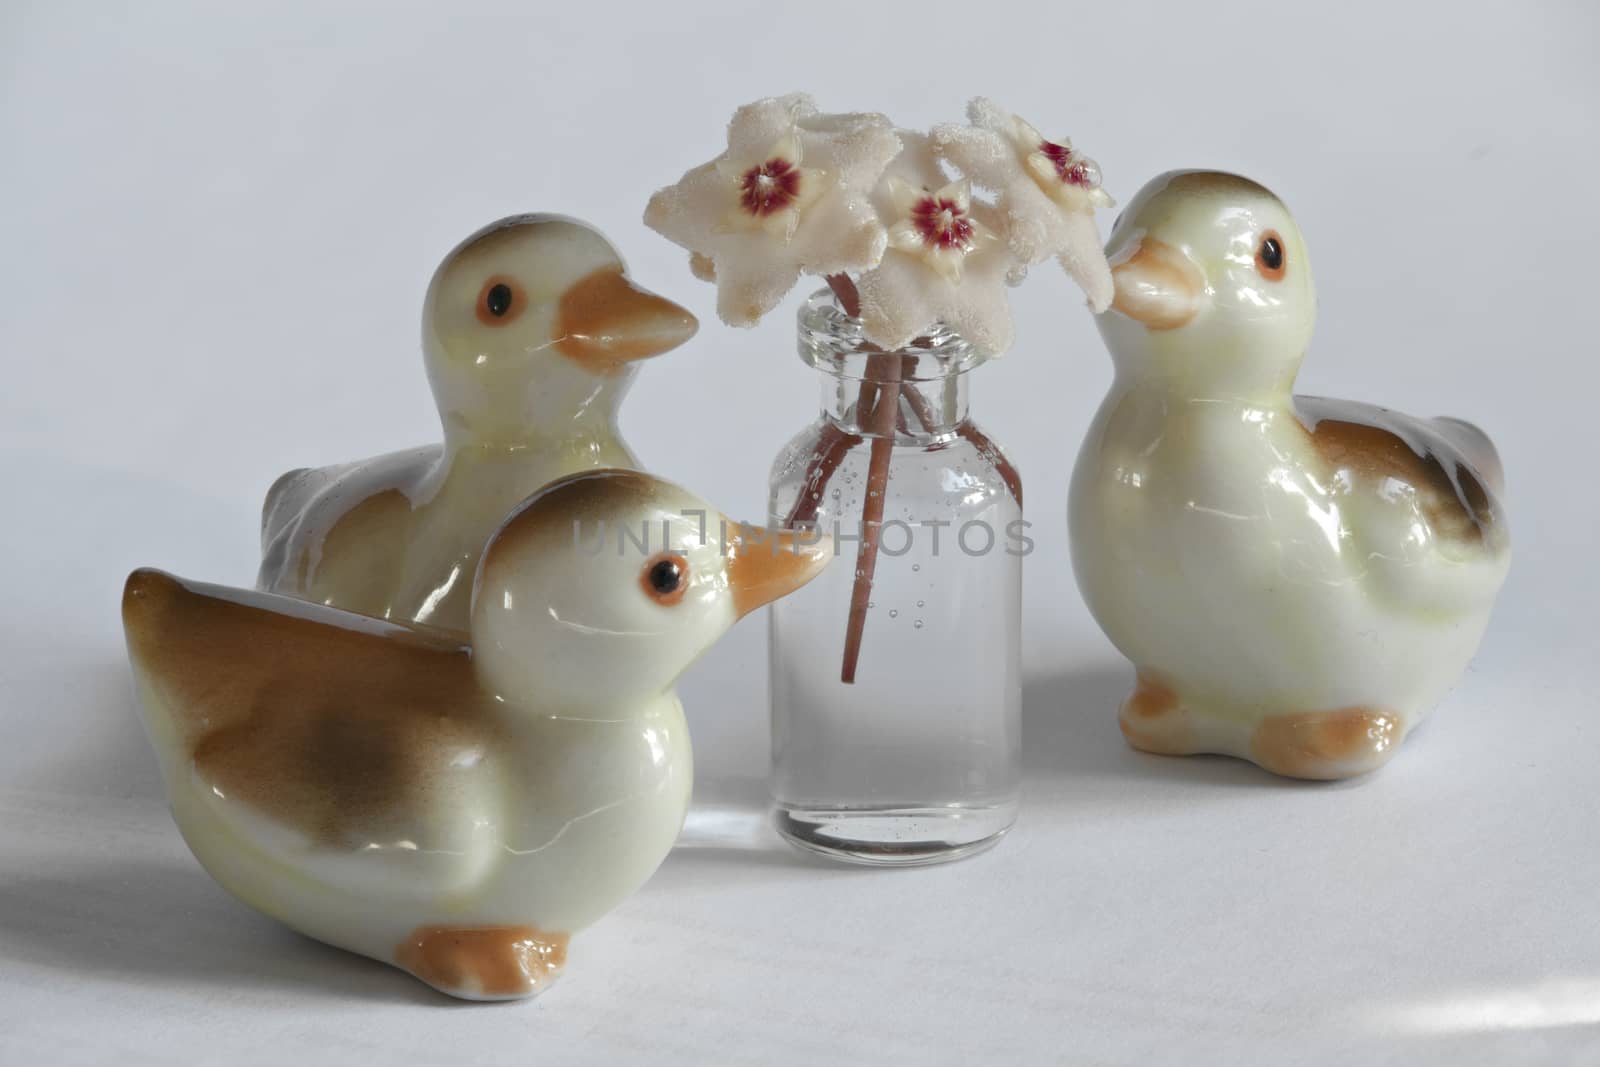 Ducklings and Hoya flowers by mrivserg